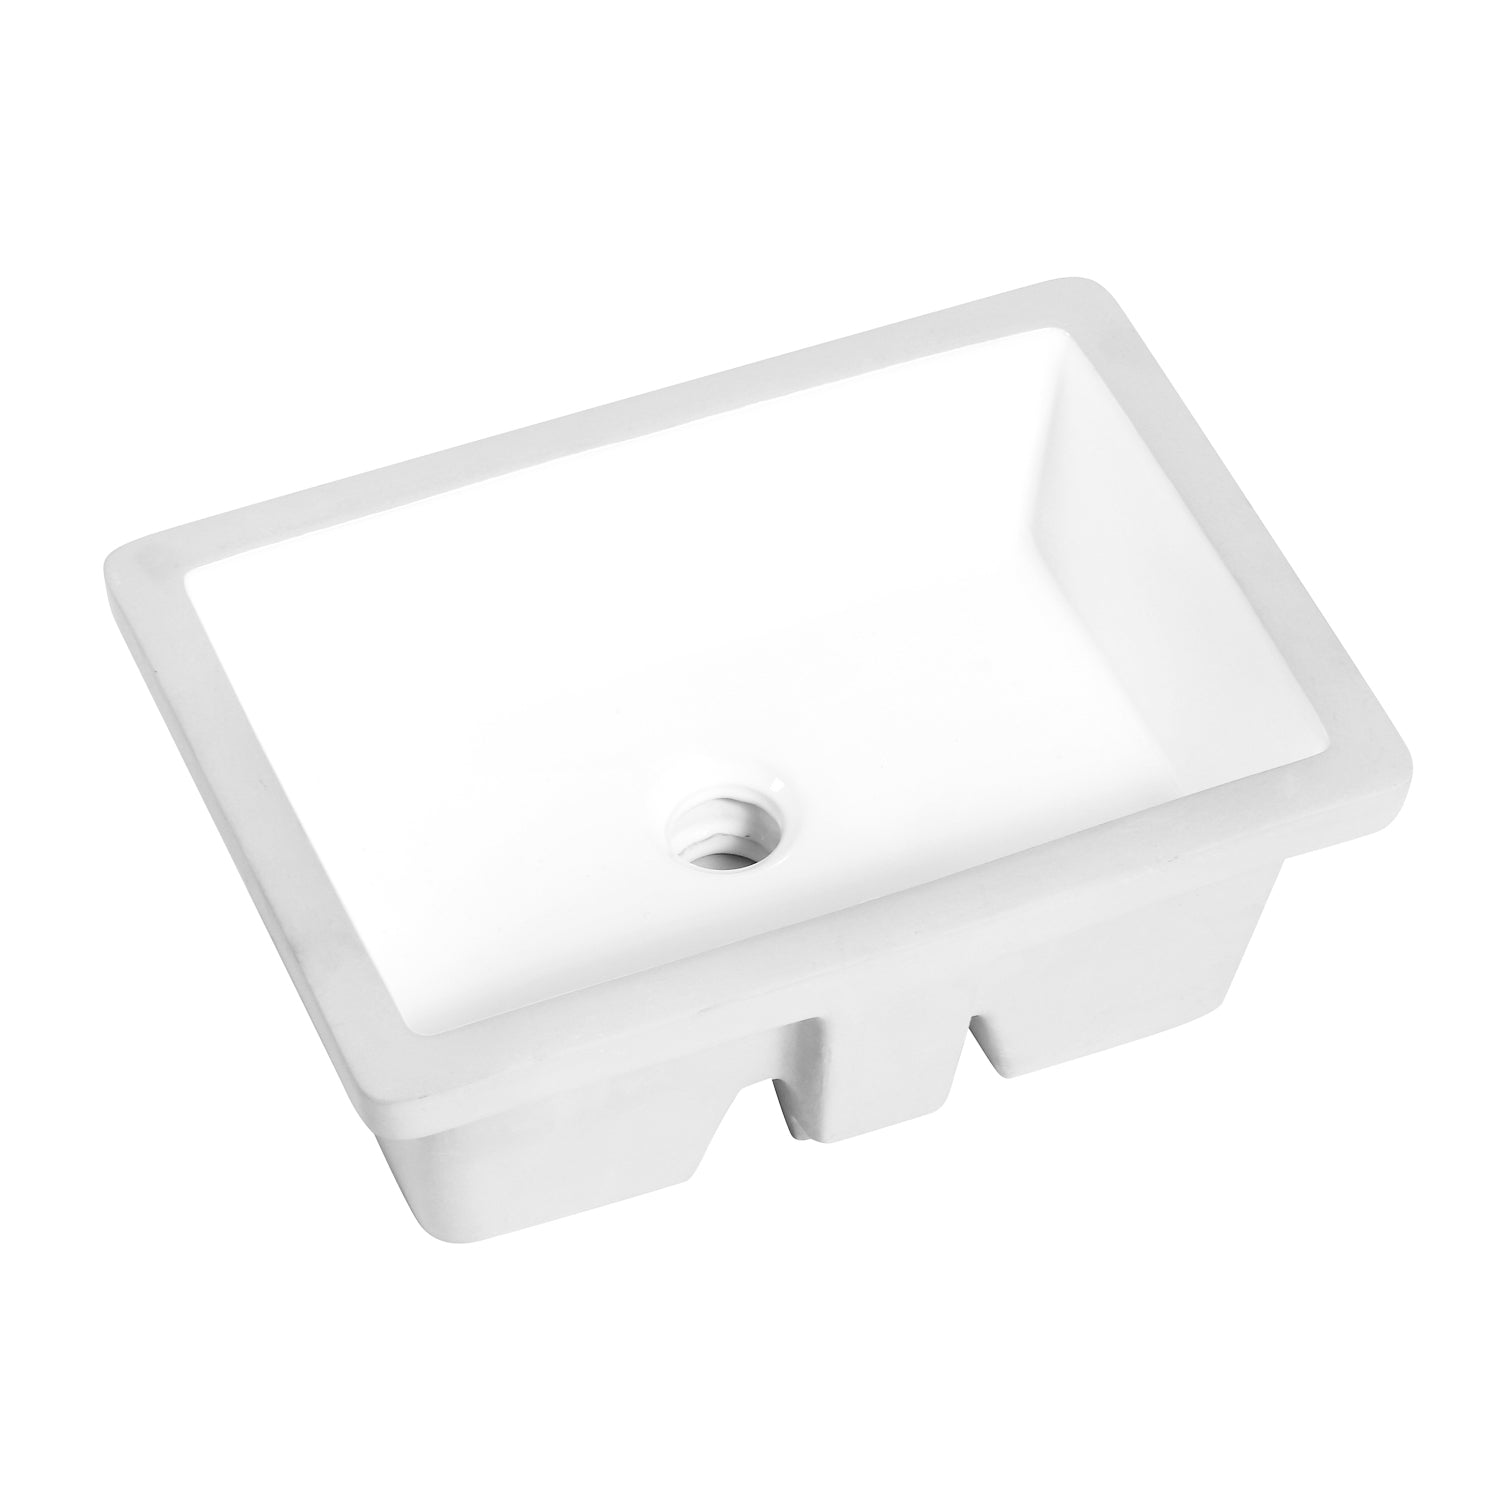 DAX Rectangle Single Bowl Undermount Bathroom Sink, Porcelain, White Finish,  17-3/8 x 12-1/4 x 6-3/8 Inches (BSN-1812)